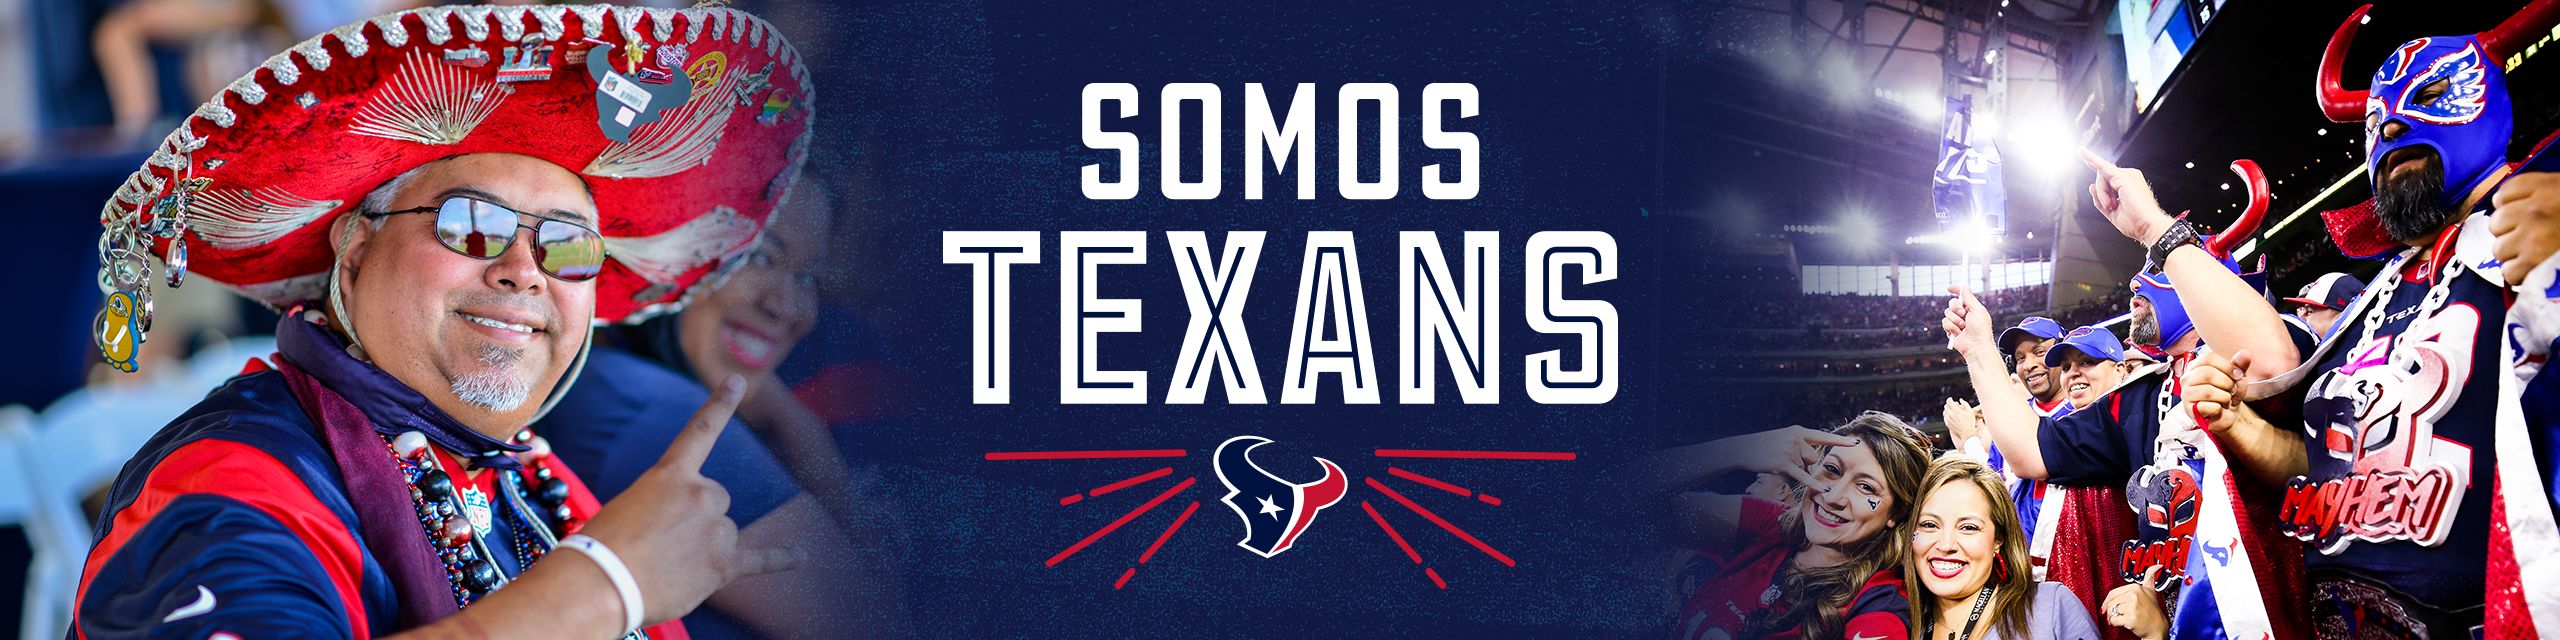 Houston Texans - Looking for a place to host your fam's